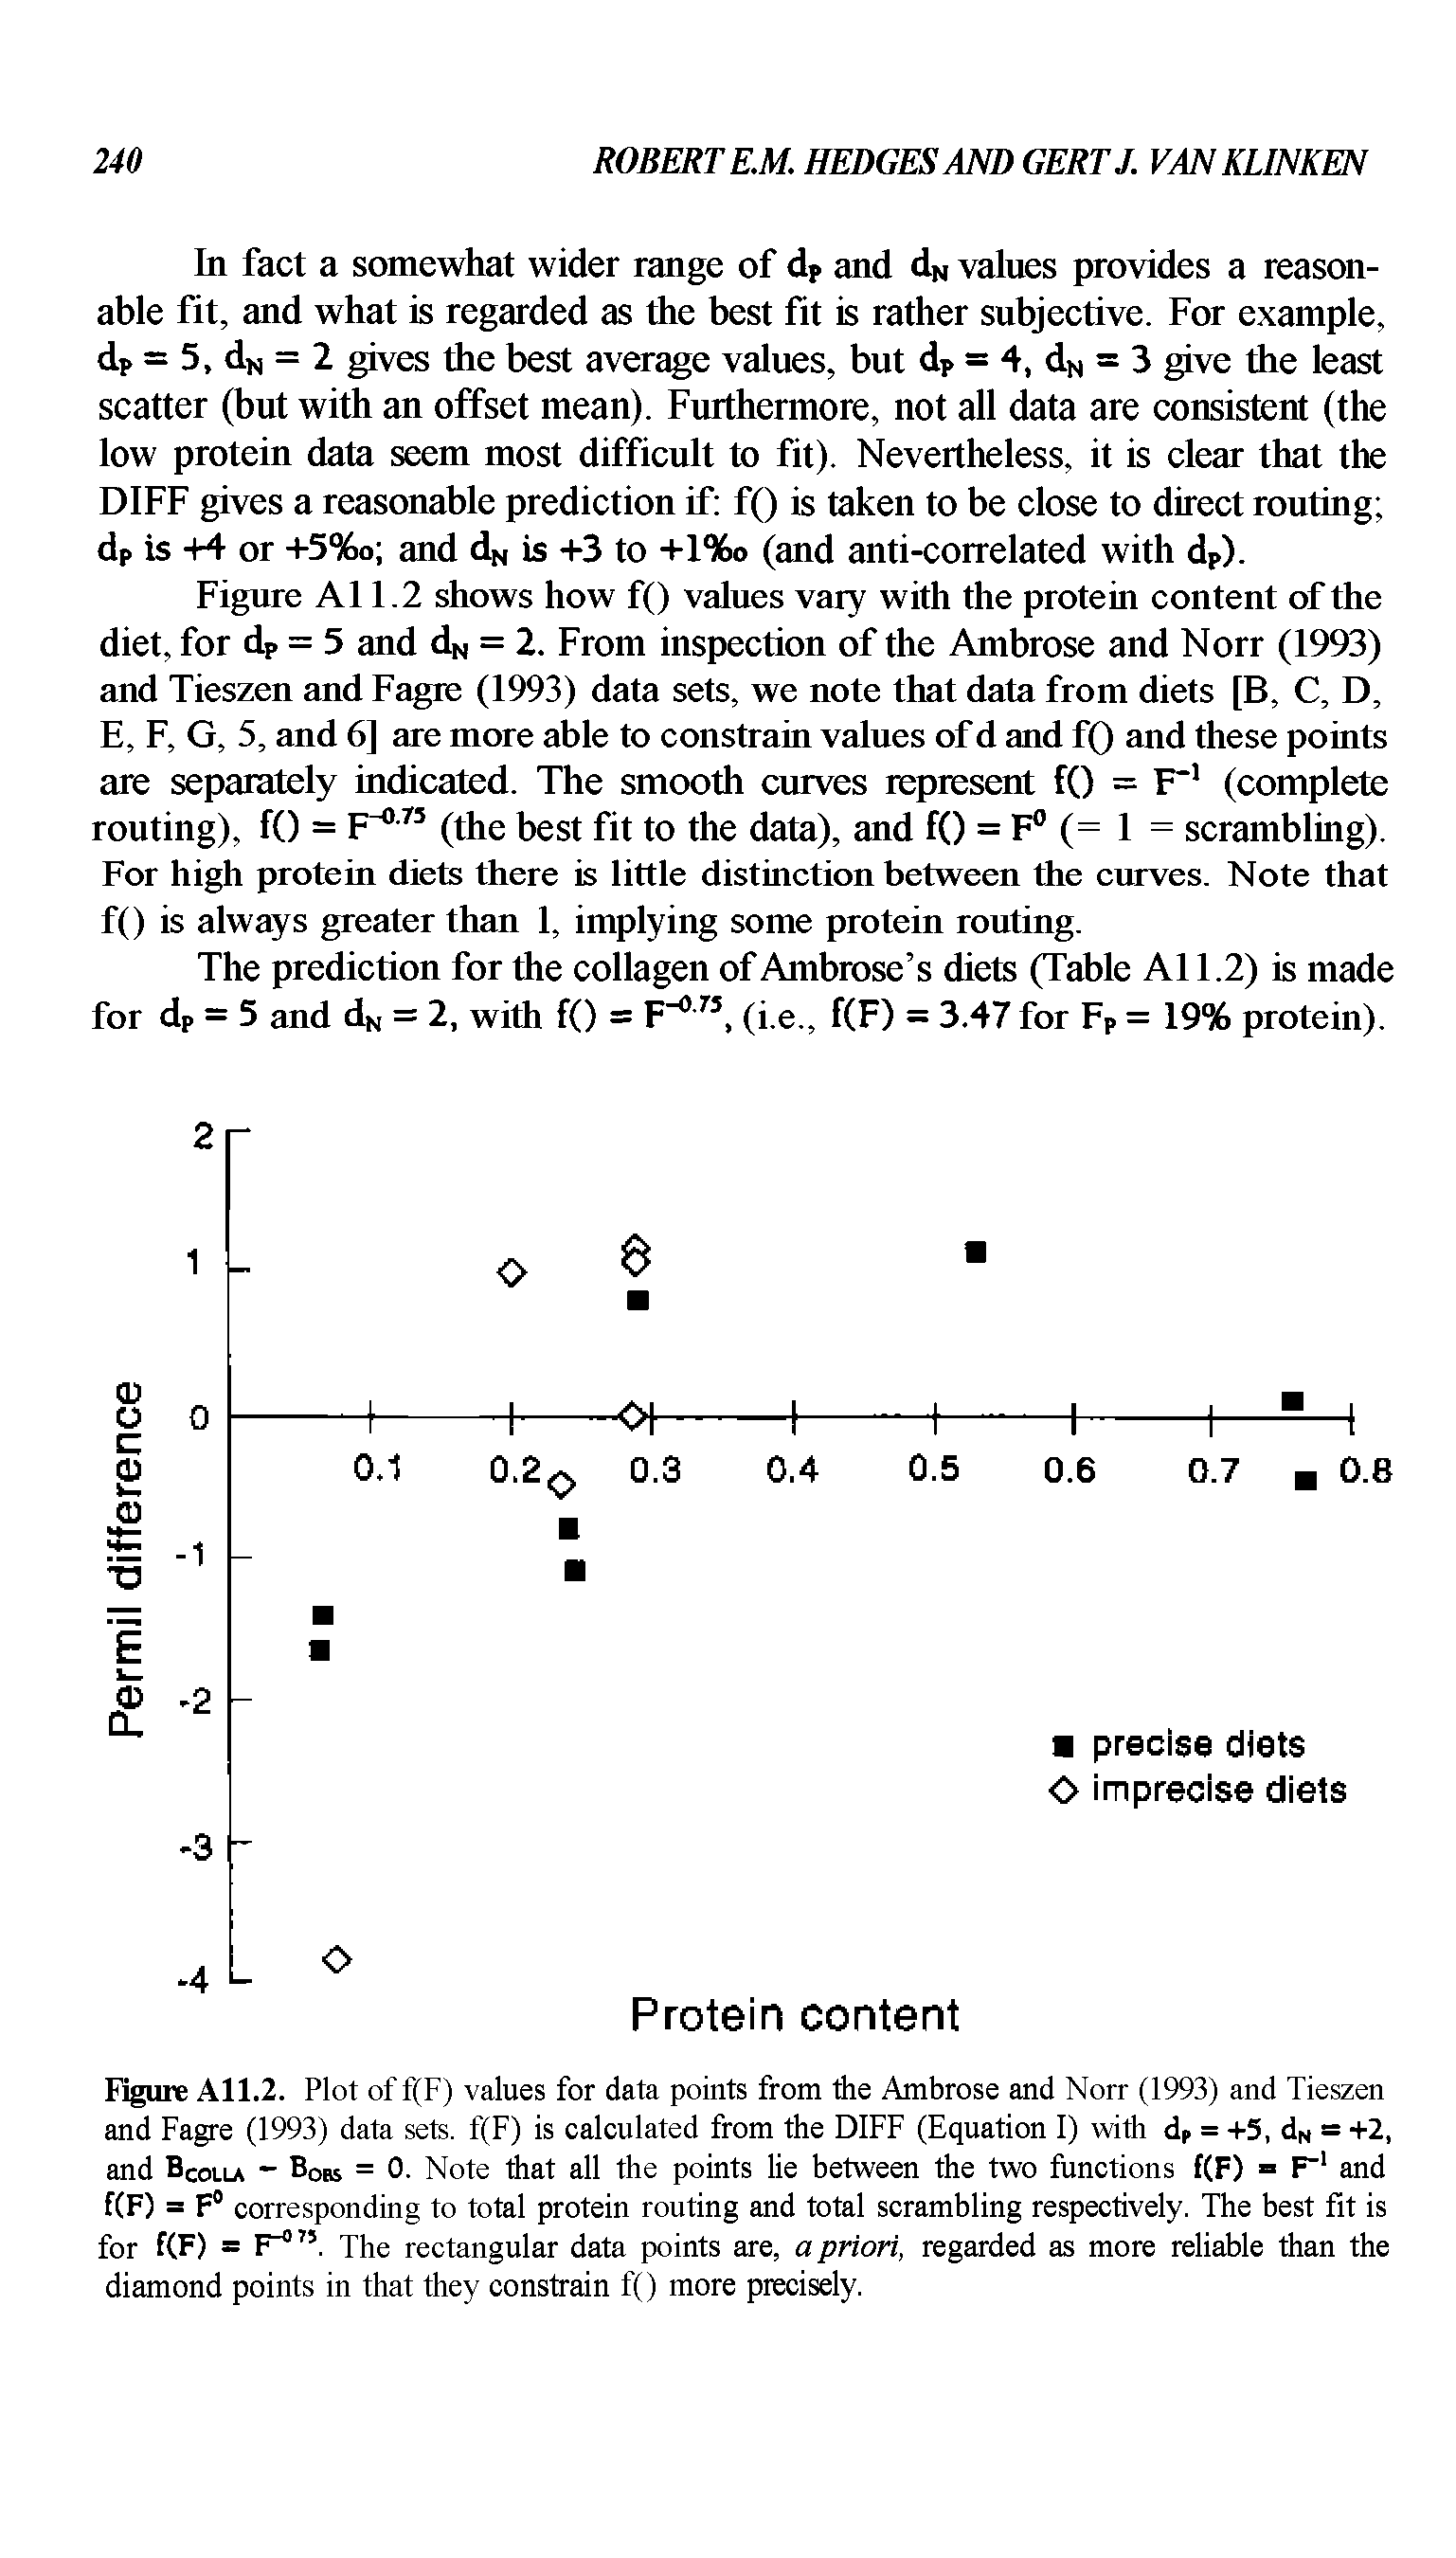 Figure A11.2 shows how f() values vary with the protein content of the diet, for dp = 5 and dw = 2. From inspection of the Ambrose and Norr (1993) and Tieszen and Fagre (1993) data sets, we note that data from diets [B, C, D, E, F, G, 5, and 6] are more able to constrain values of d and fQ and these points are separately indicated. The smooth curves represent f() = F (complete routing), f() = (the best fit to the data), and f() = F (= 1 = scrambling). For high protein diets there is little distinetion between the eurves. Note that f() is always greater than 1, implying some protein routing.